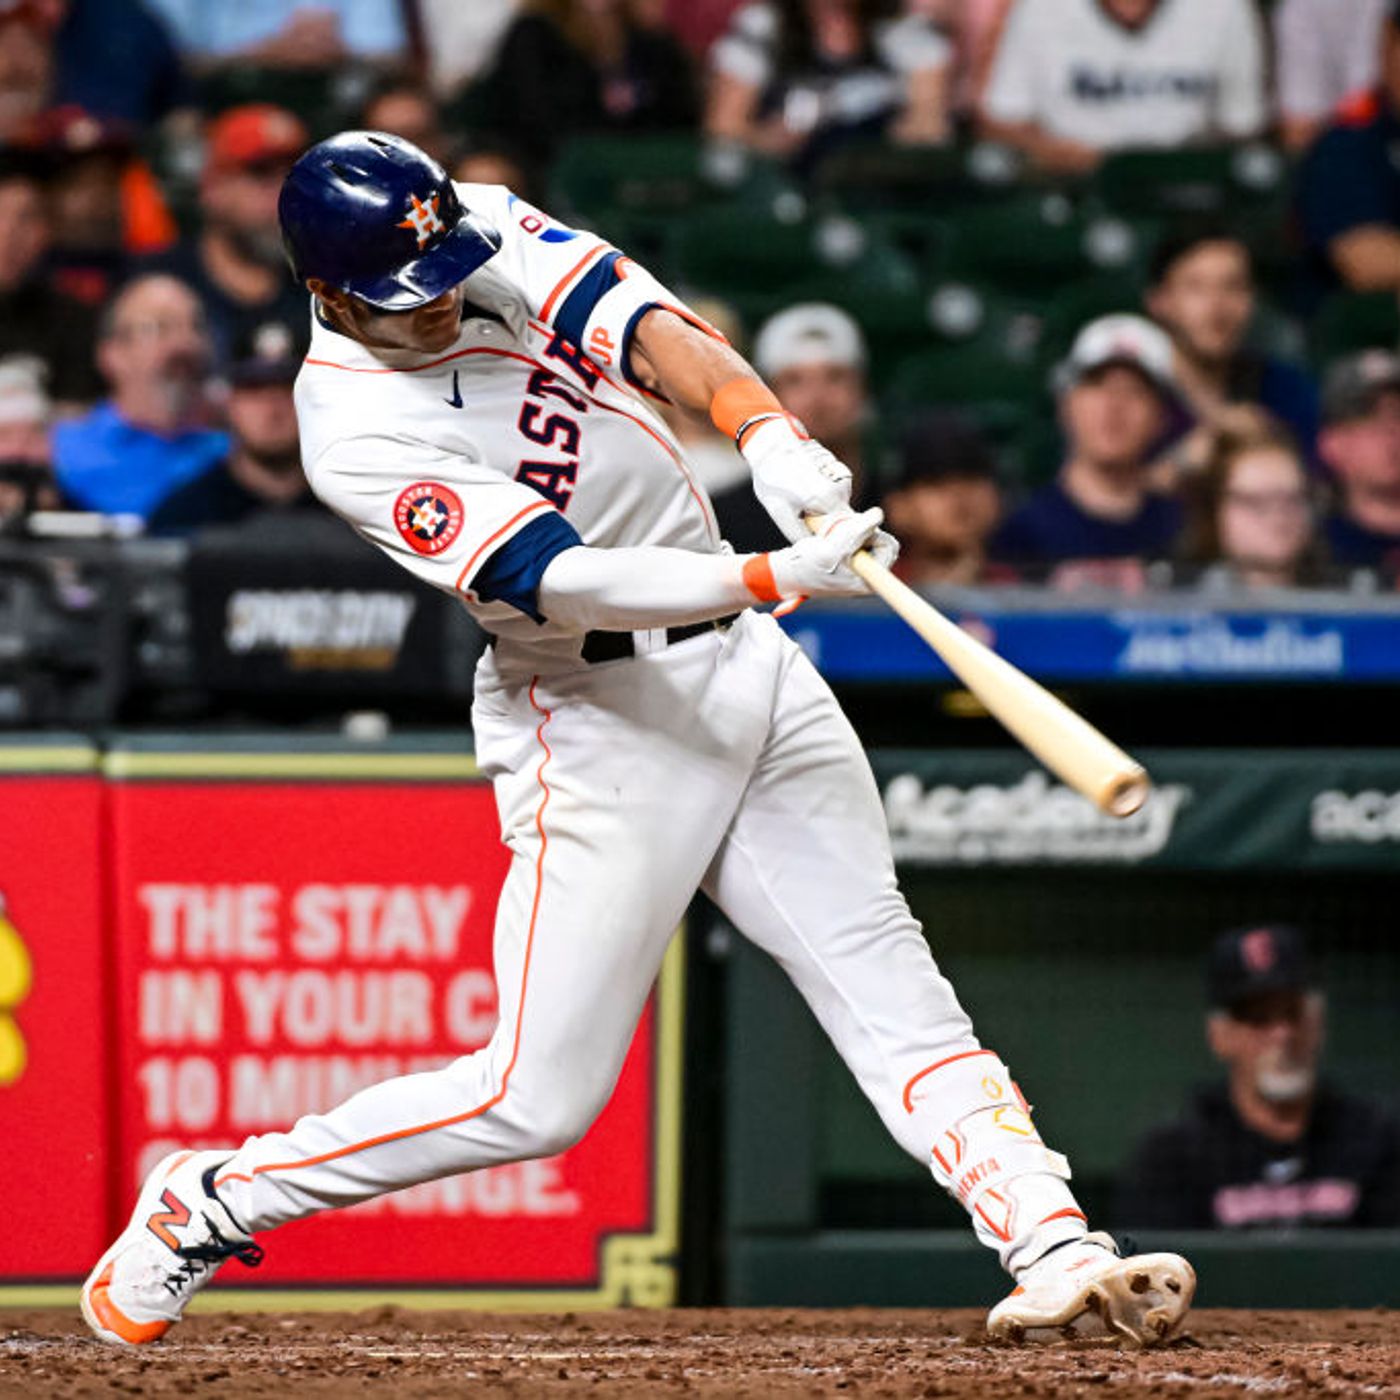 Brian Bogusevic Says The Astros Have A 'Lack Of Execution In Close Games'